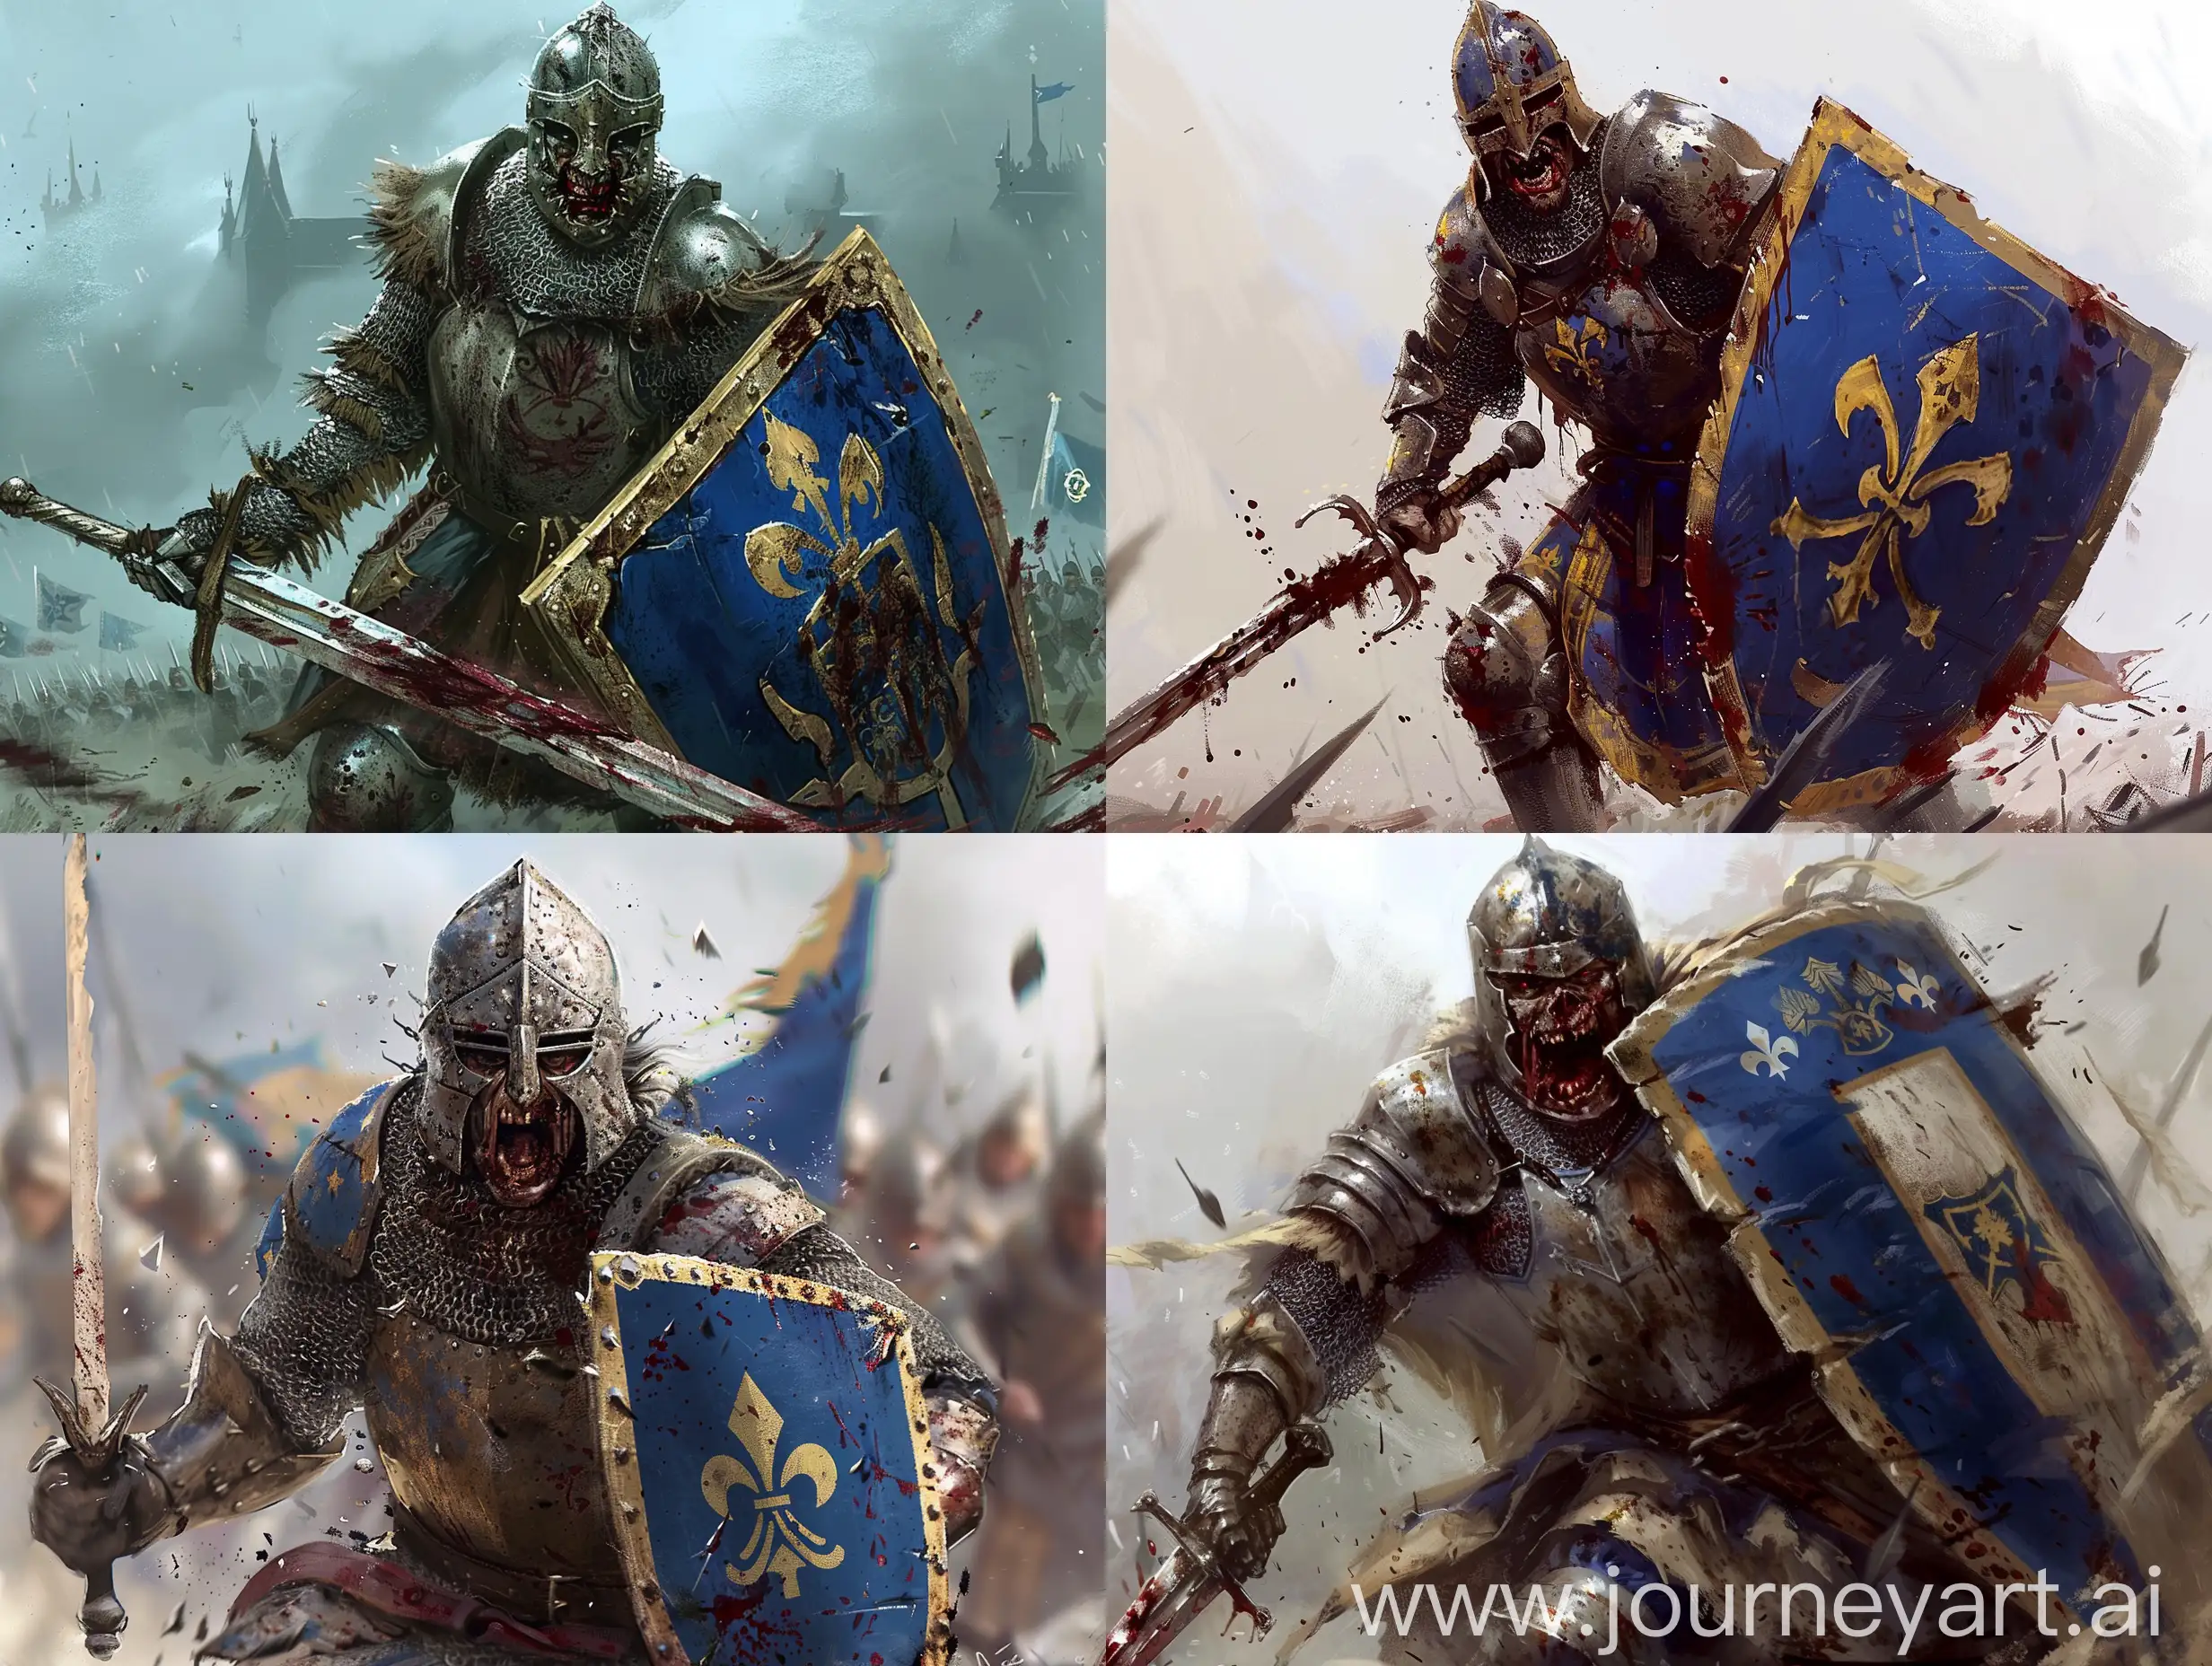 Medieval-Knight-of-France-Wielding-Bloodied-Sword-and-Shield-on-Battlefield